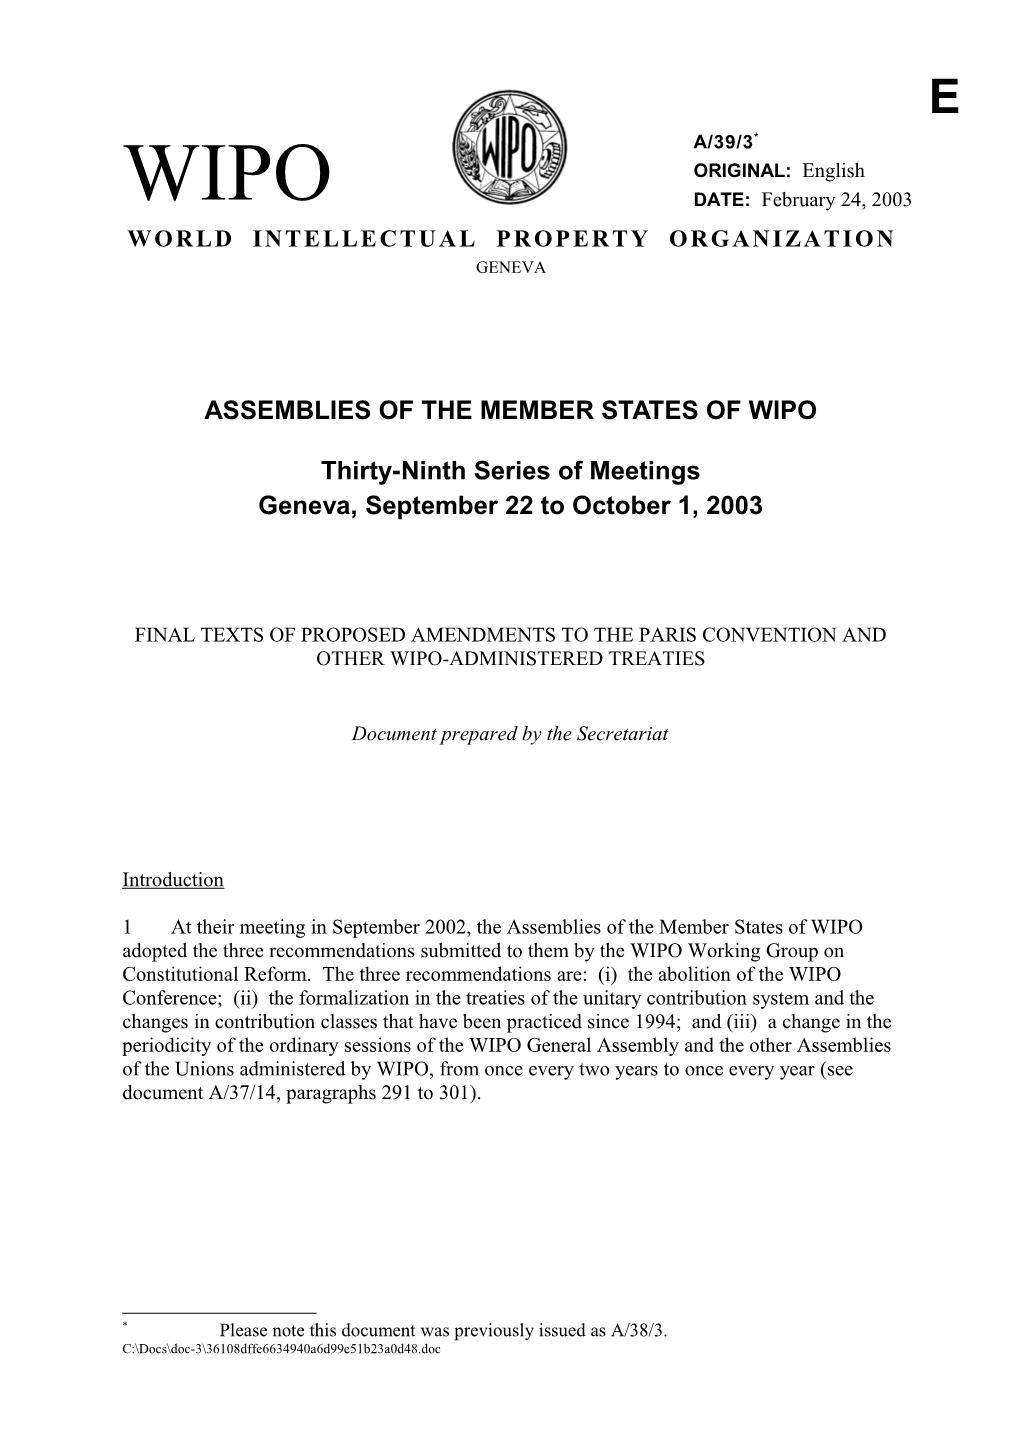 A/39/3: Final Texts of Proposed Amendments to the Paris Convention and Other WIPO-Administered